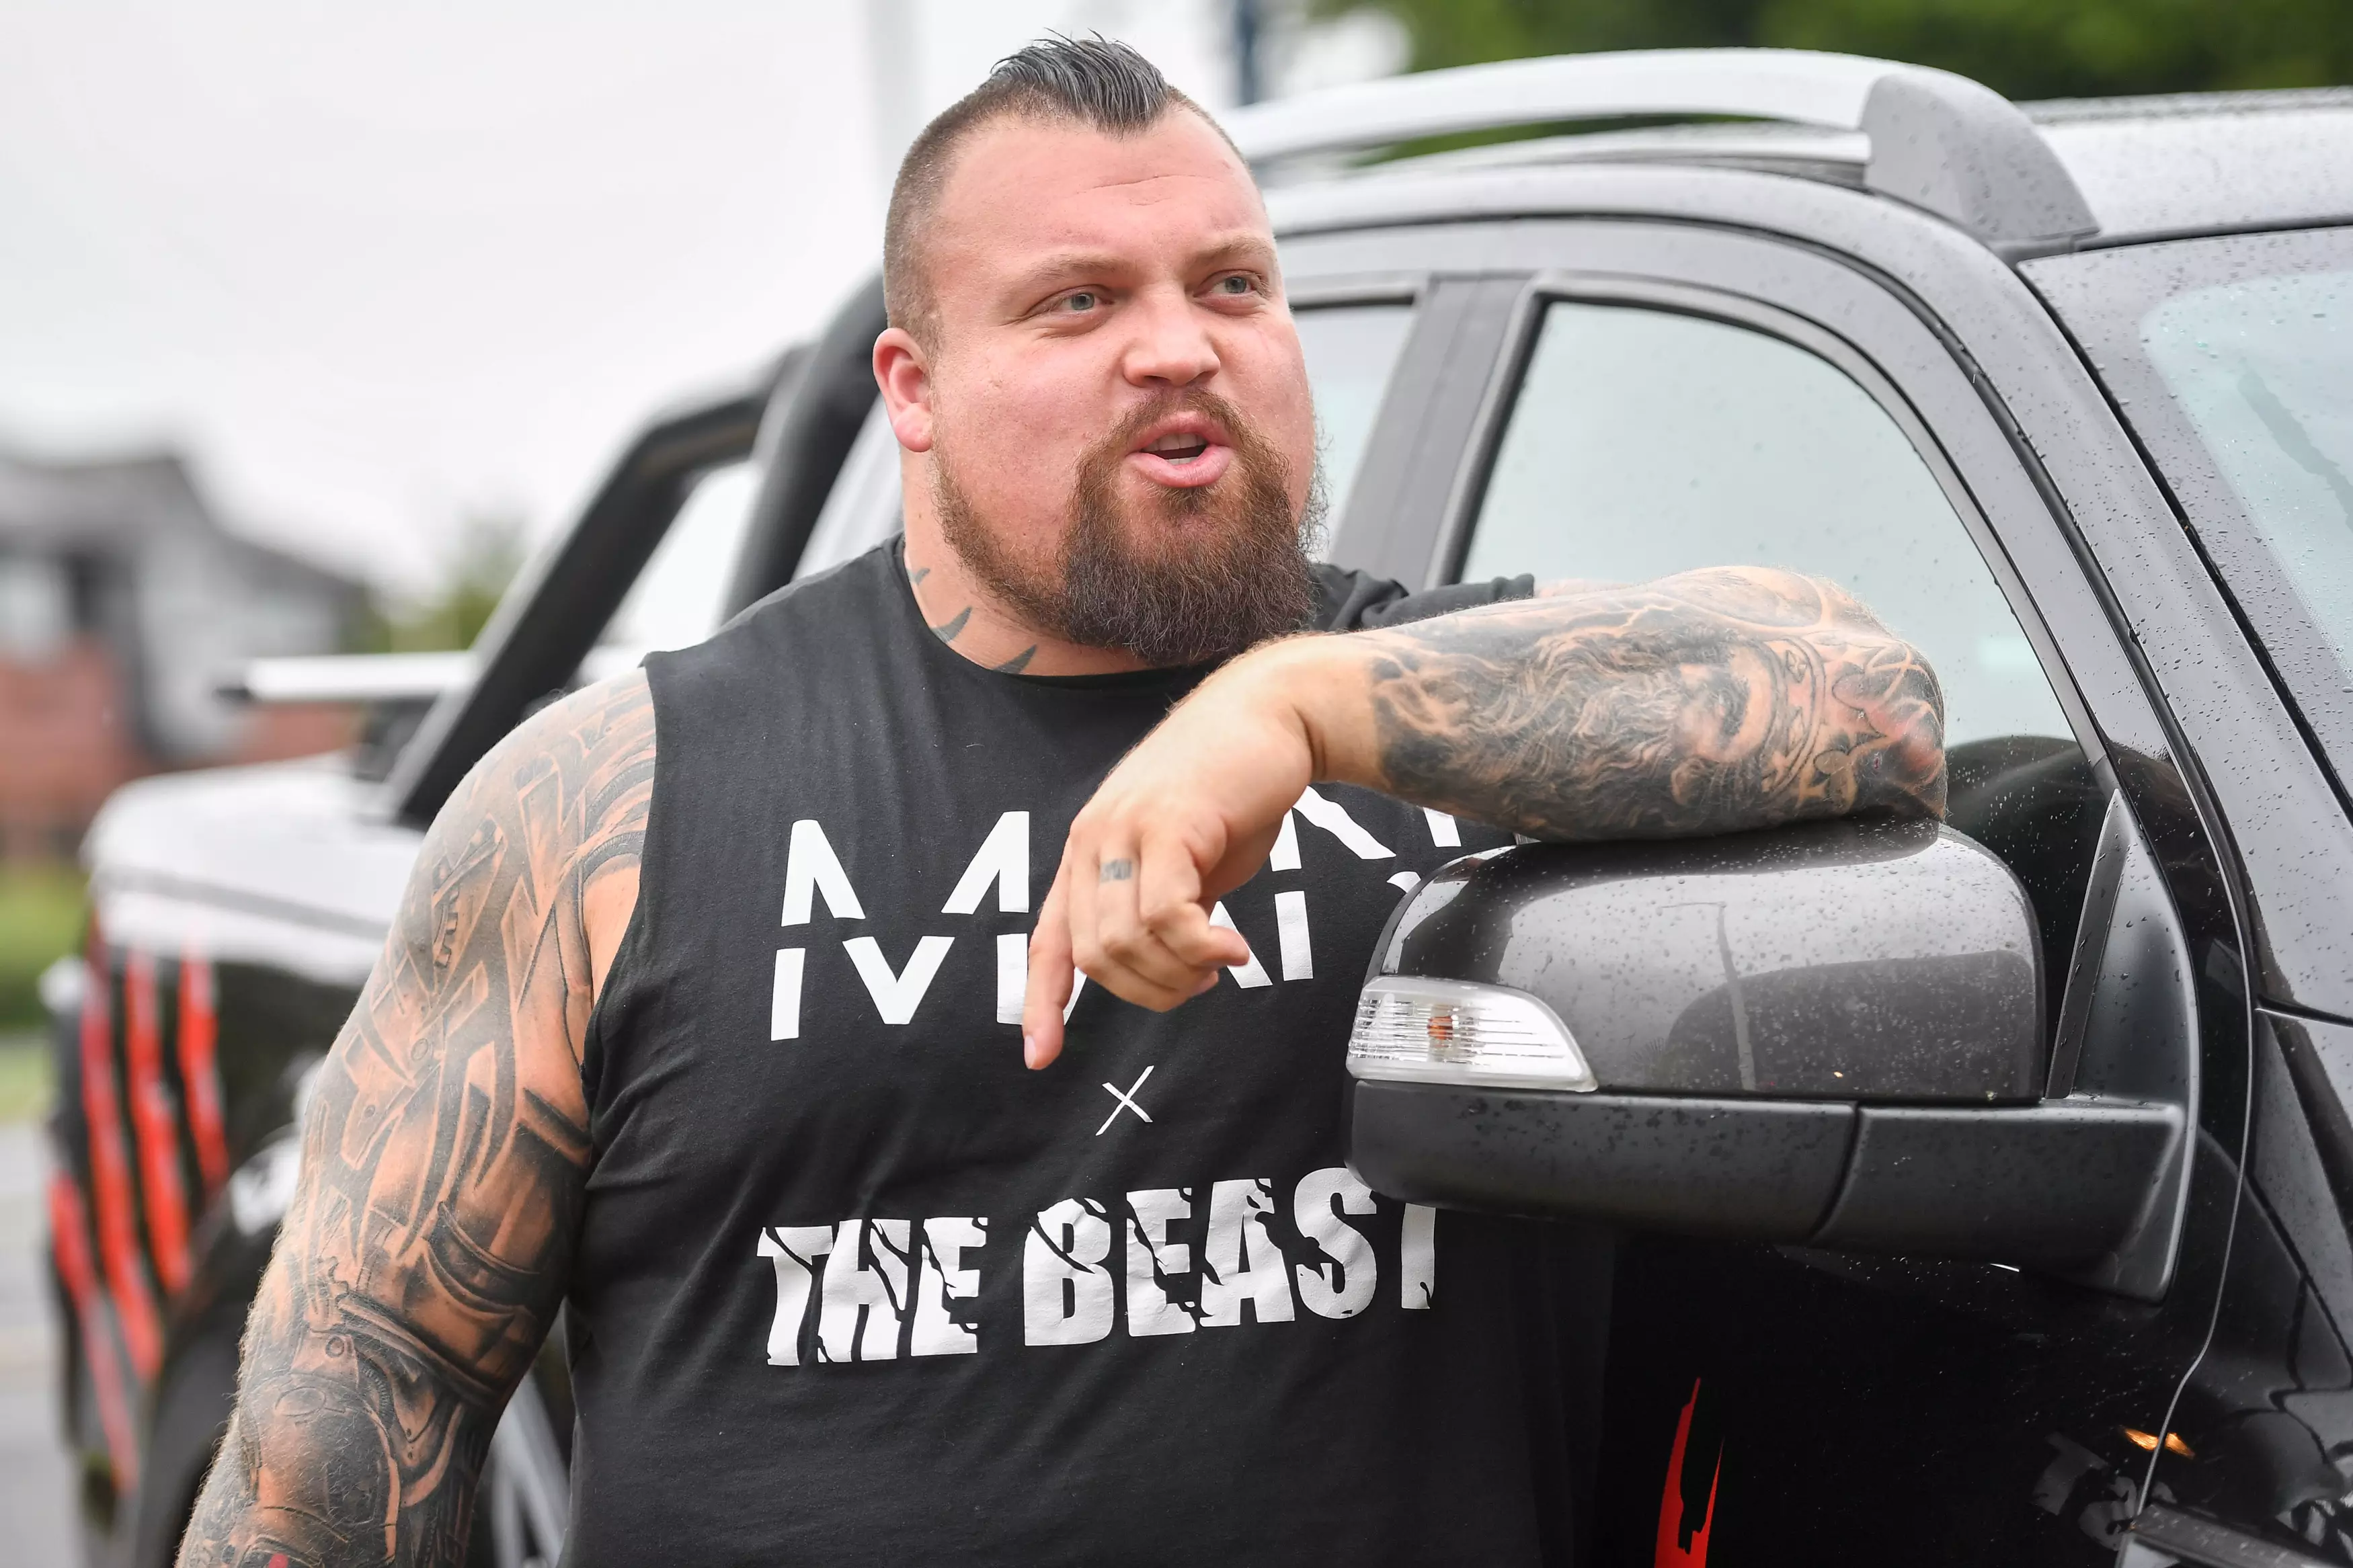 Eddie Hall during a public appearance in August 2019. (Image